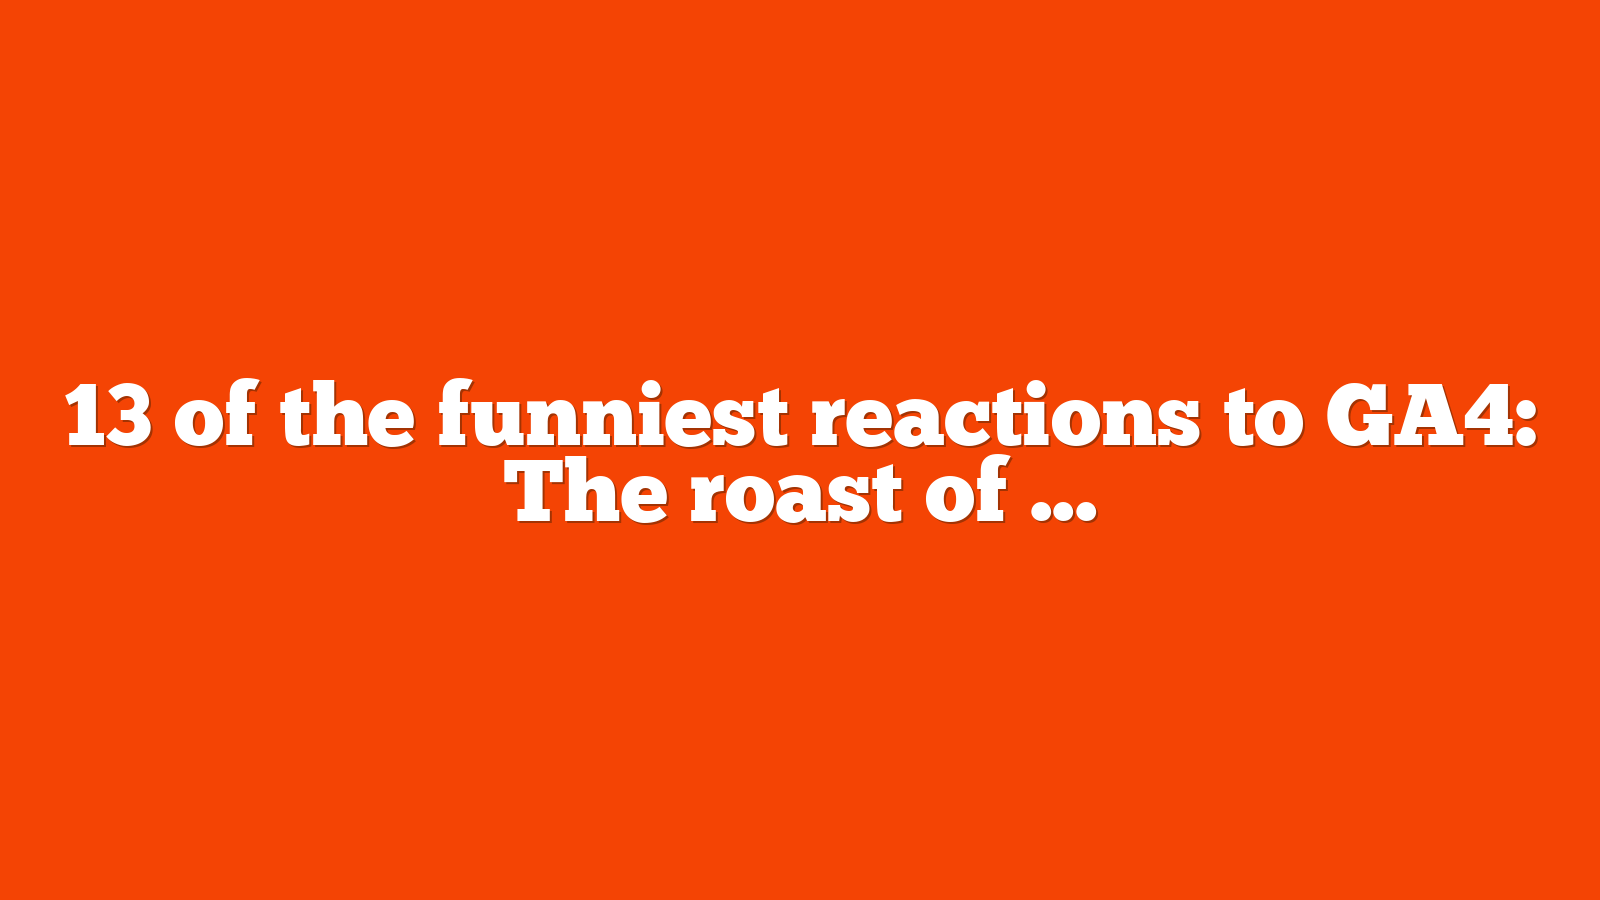 13 of the funniest reactions to GA4 The roast of Google Analytics 4